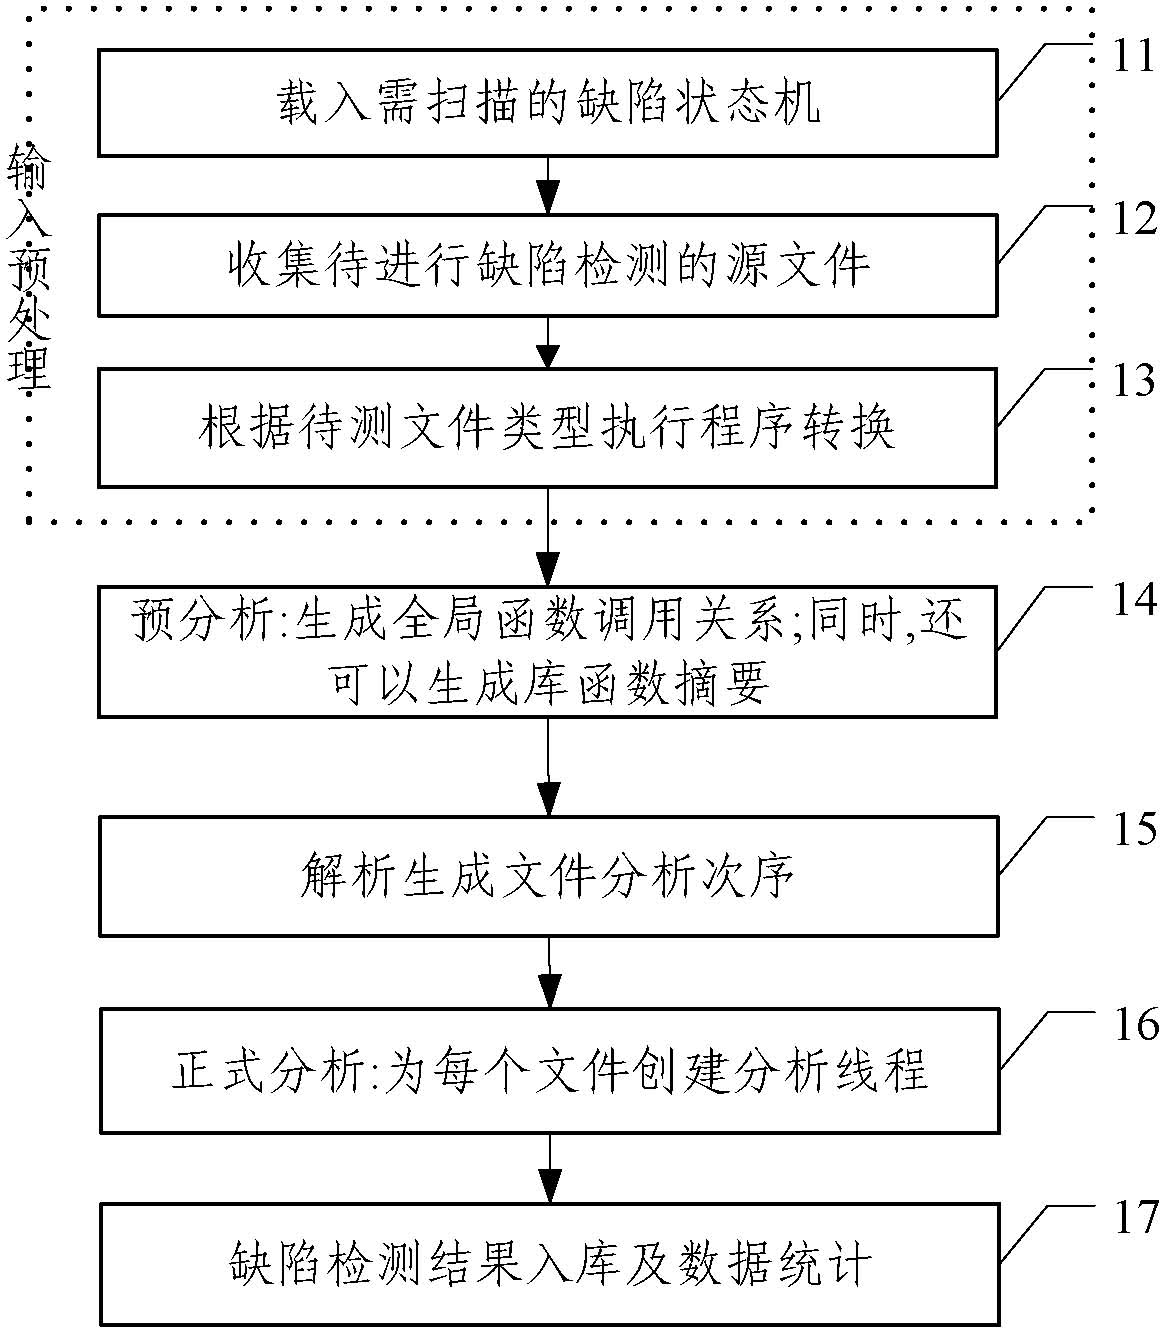 Complexity analysis method of software defect testing system based on modular decomposition technology